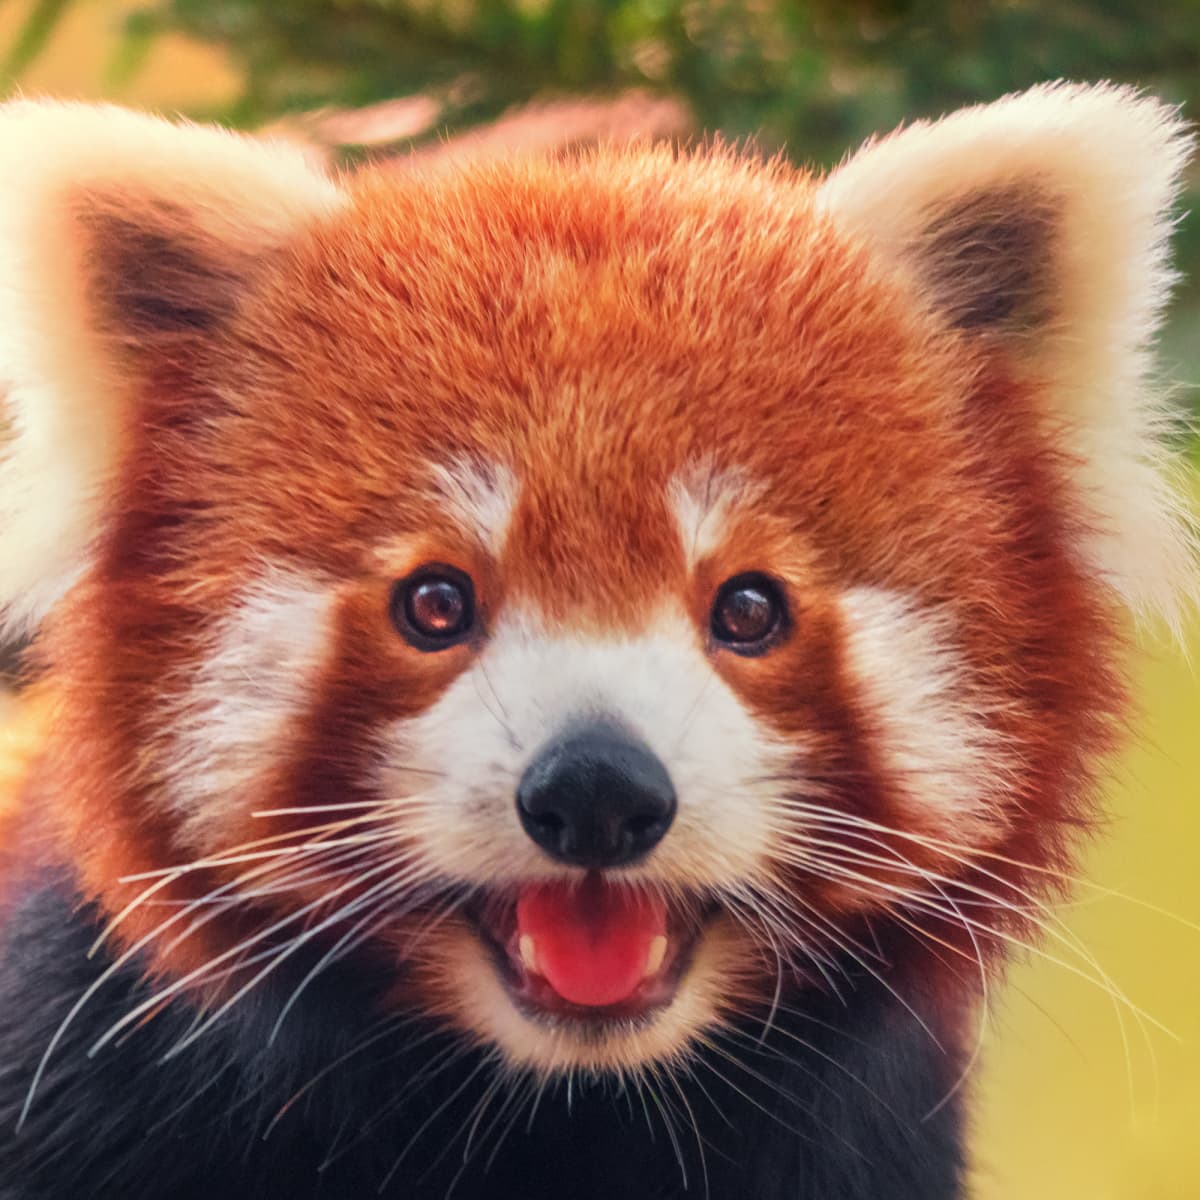 Red Panda's of a Snack Is a Timeline Cleanse - PetHelpful News